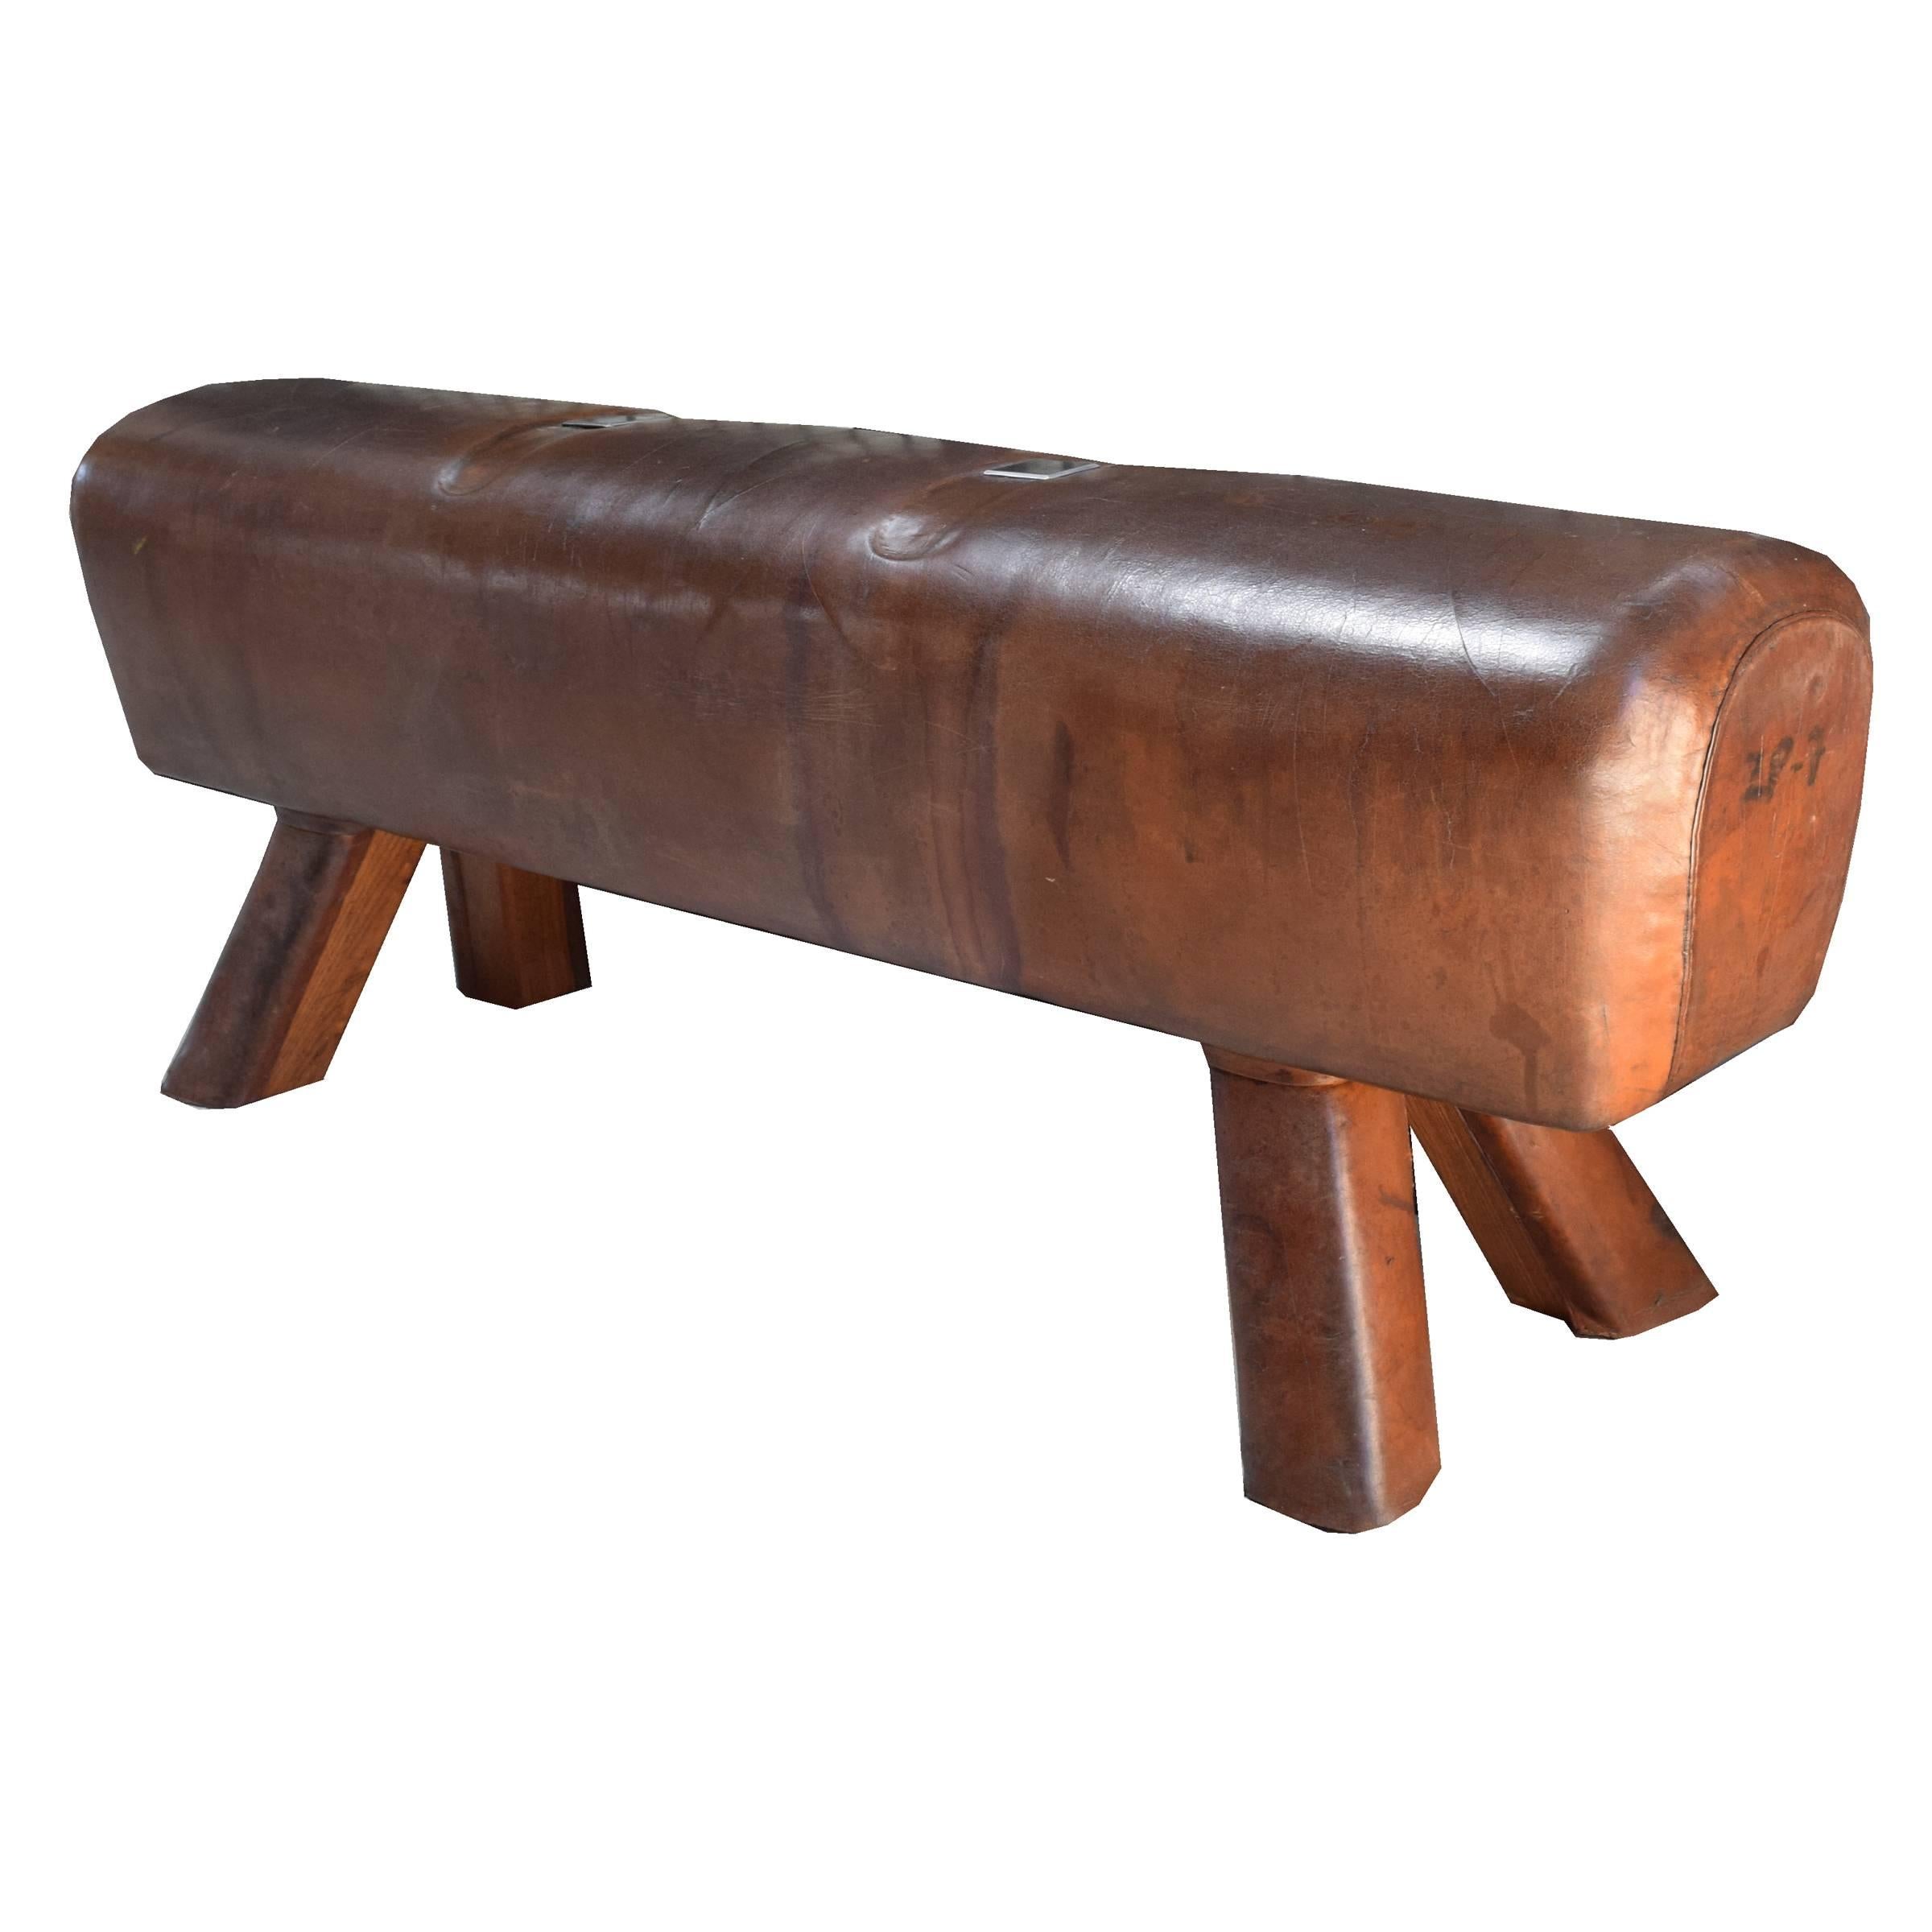 A fantastic early 20th century Czech leather pommel horse bench with leather covered wooden legs and custom steel plates covering the location of the original handles.